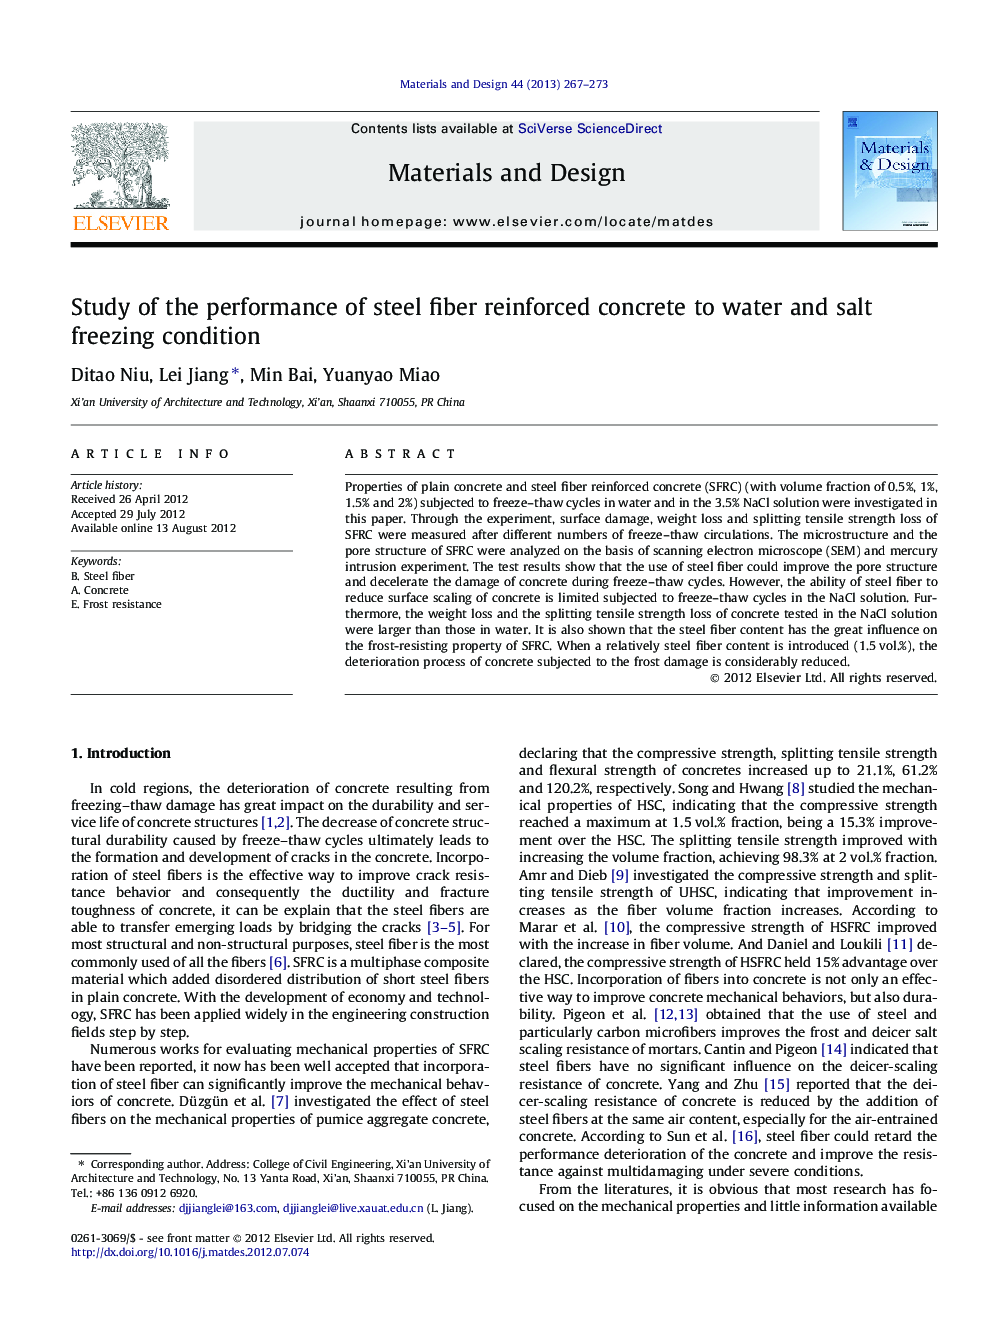 Study of the performance of steel fiber reinforced concrete to water and salt freezing condition